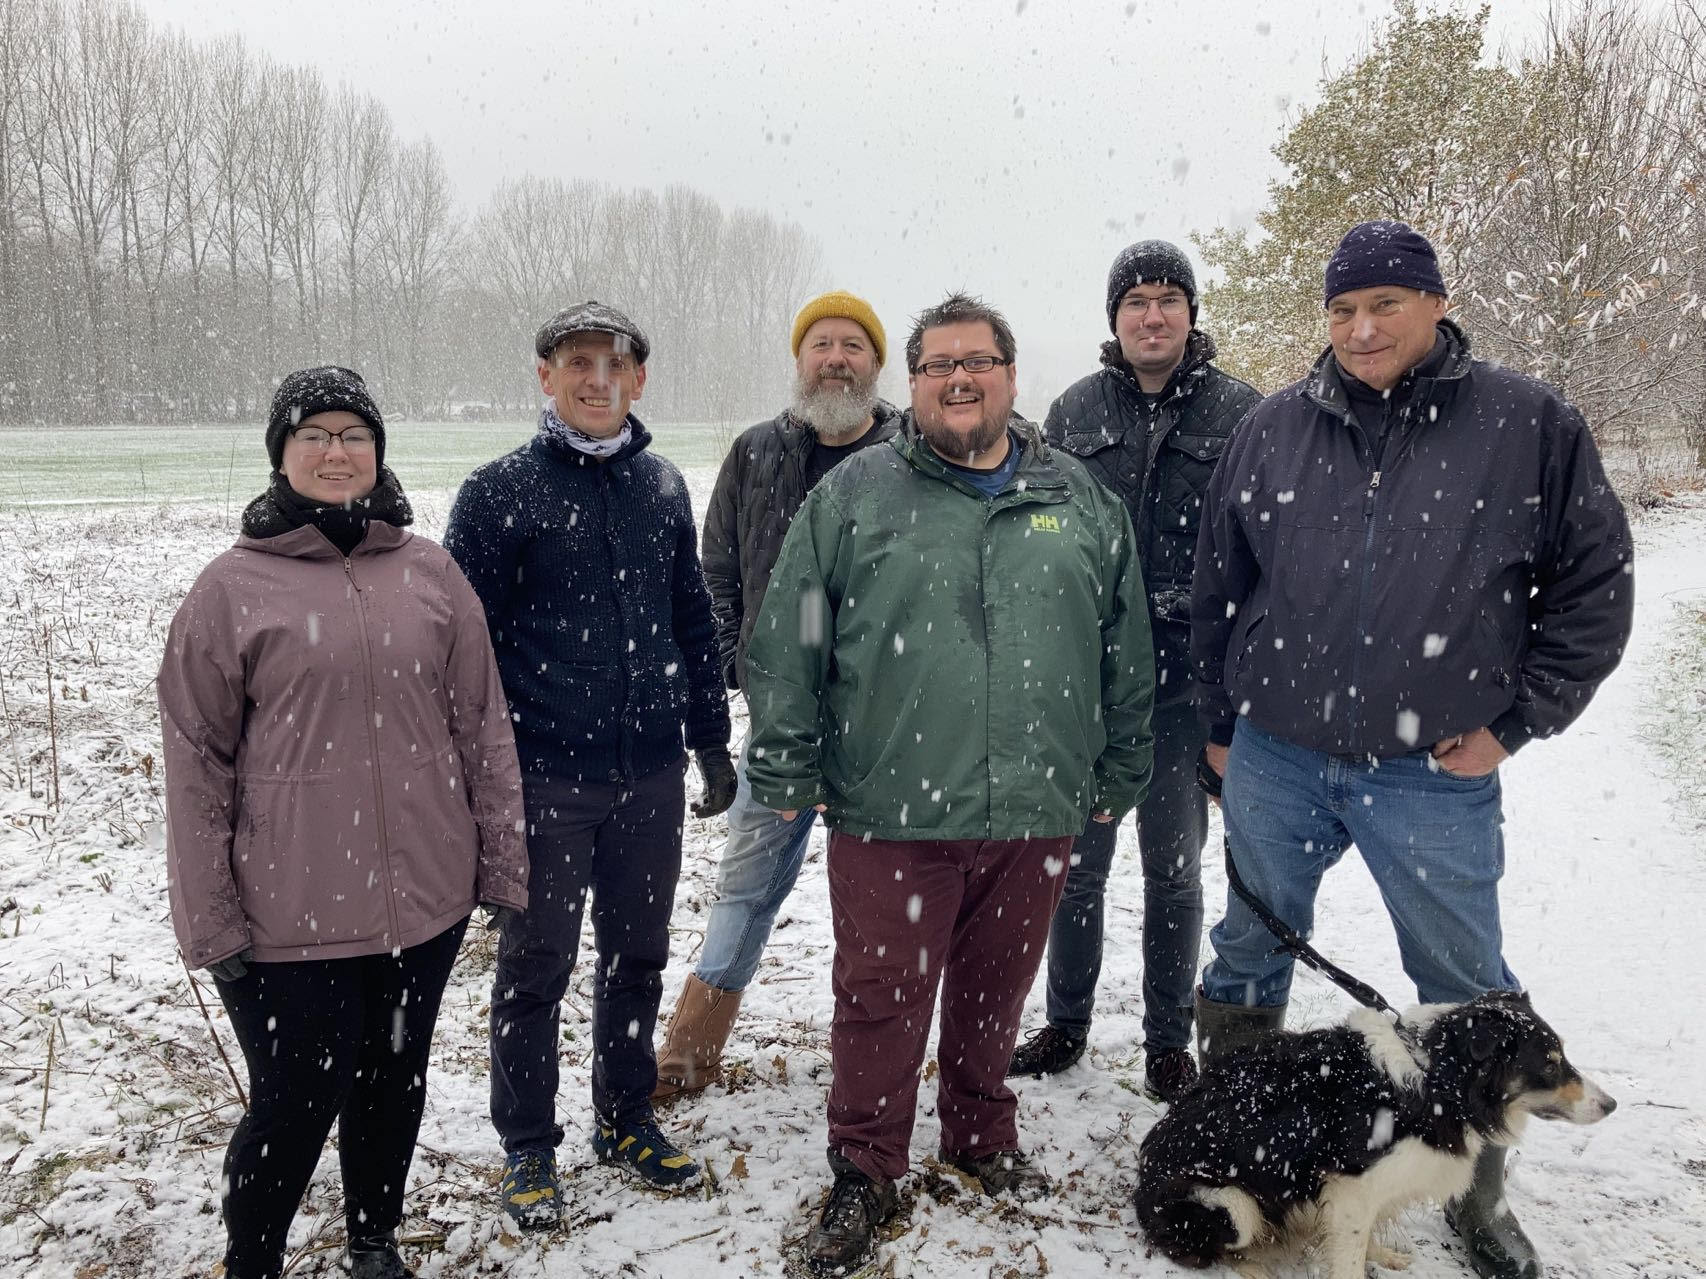 A group photo after the planting in the snow with Green members, a dog and Councillors Sarah Hall, Scott Cunliffe and Andy Fewings